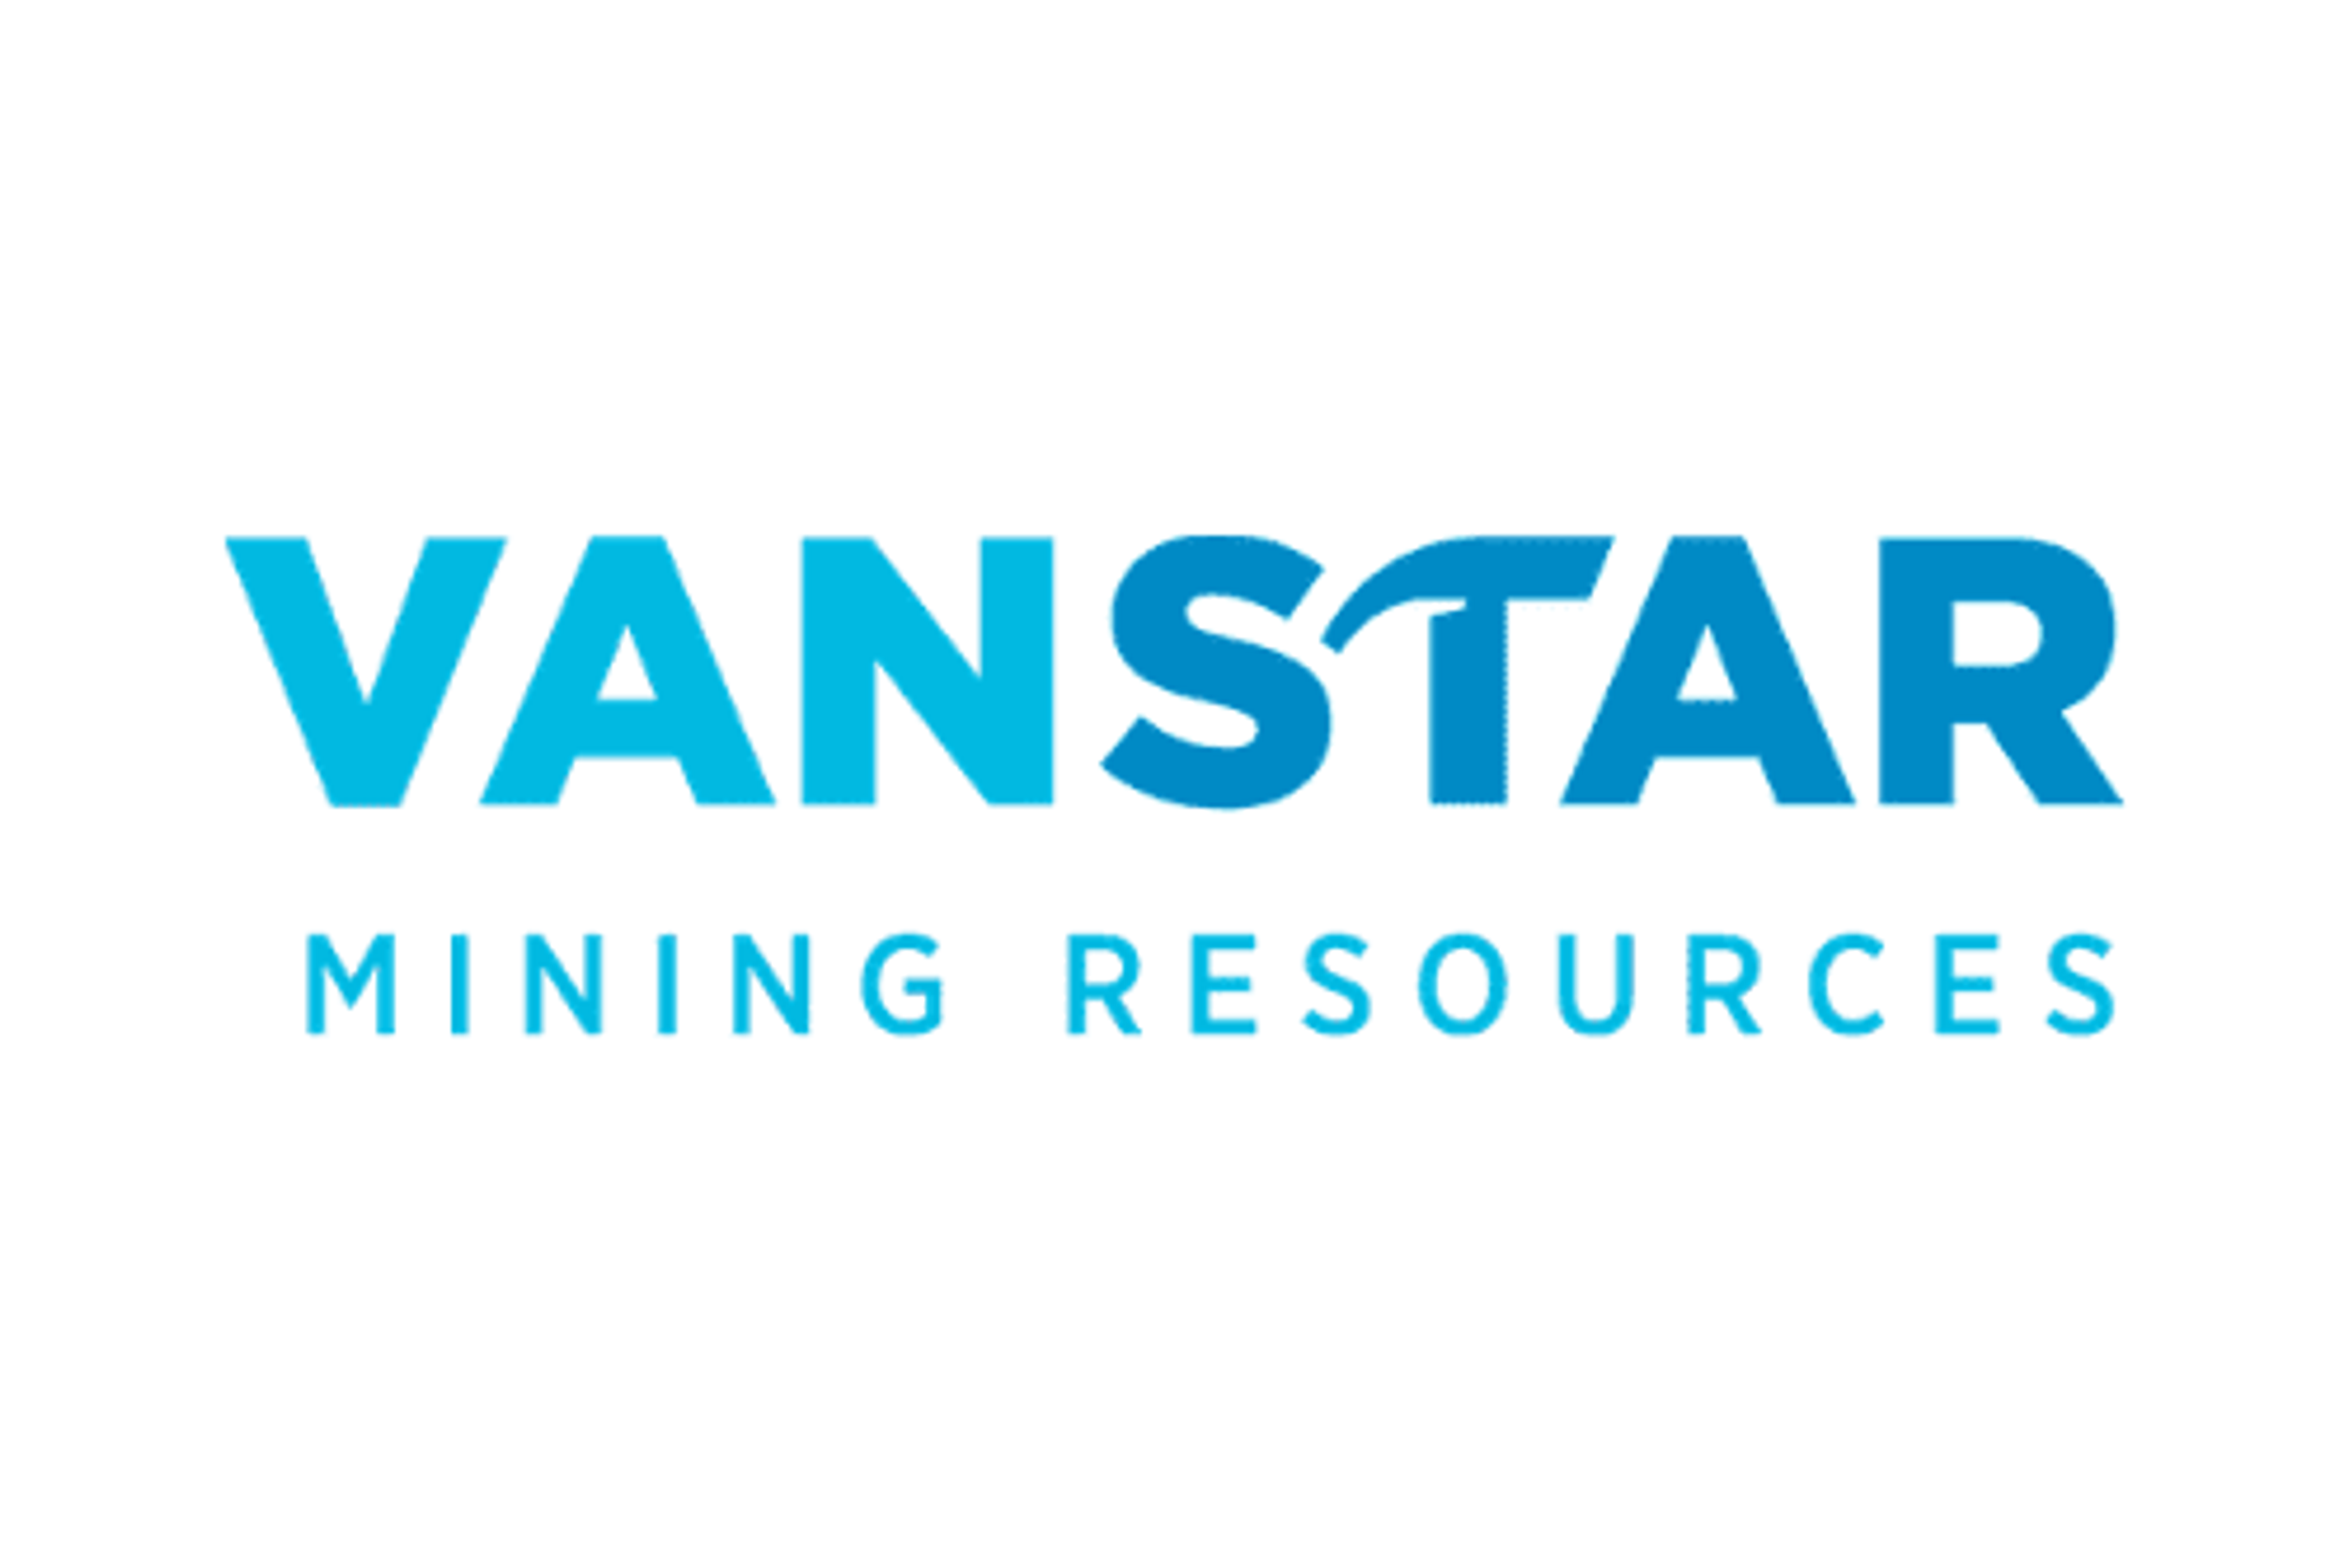 Vanstar Mining Resources 2021 Review and Outlook for 2022 - Drilling Resumes at Nelligan